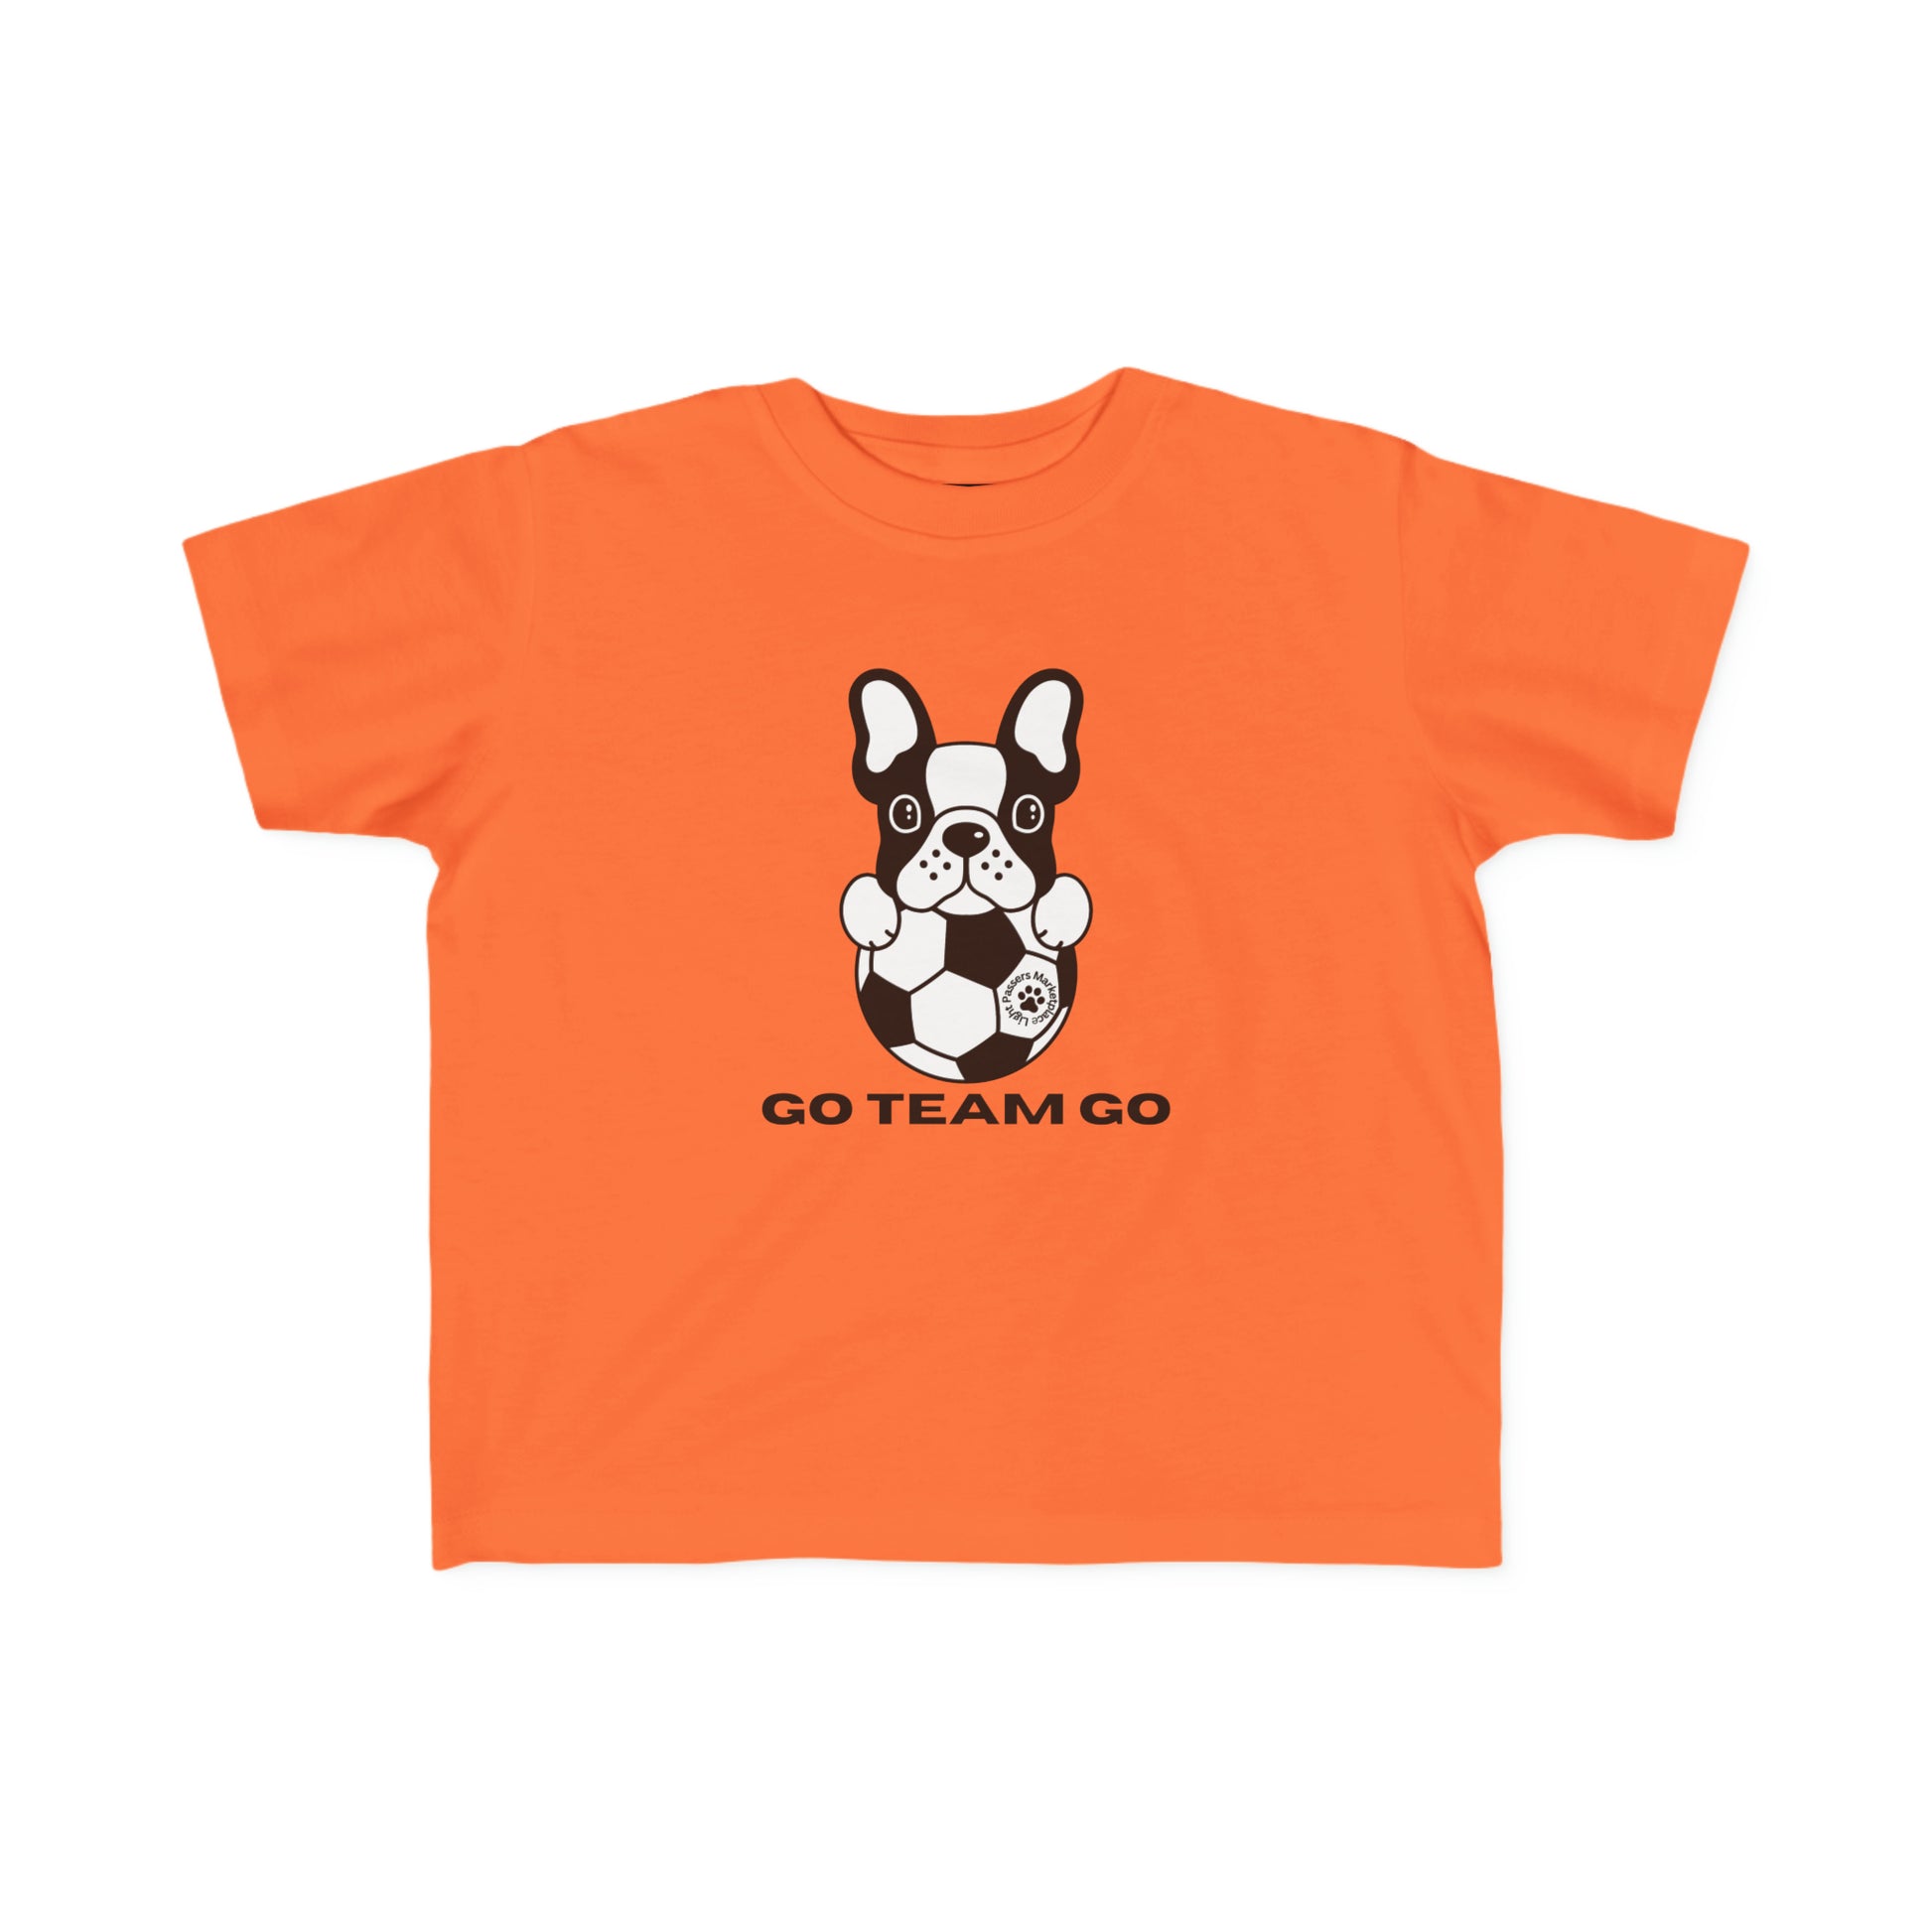 Toddler T-shirt featuring a dog with a football, ideal for sensitive skin. 100% combed cotton, light fabric, tear-away label, classic fit. Soccer Dog Go Team Go design.